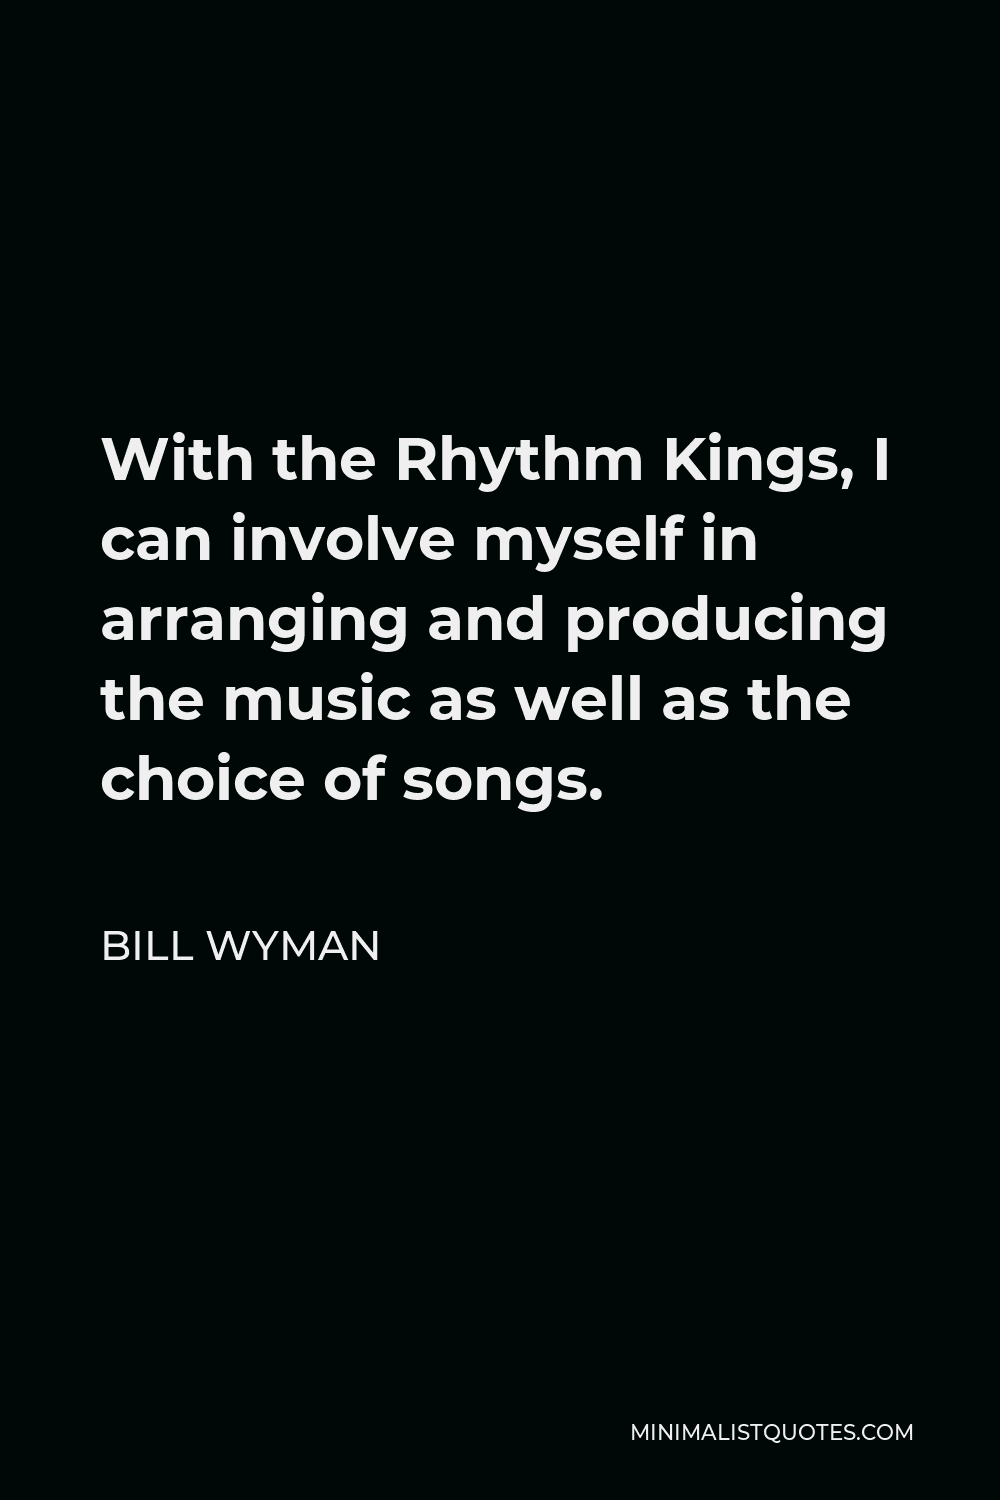 Bill Wyman Quote - With the Rhythm Kings, I can involve myself in arranging and producing the music as well as the choice of songs.